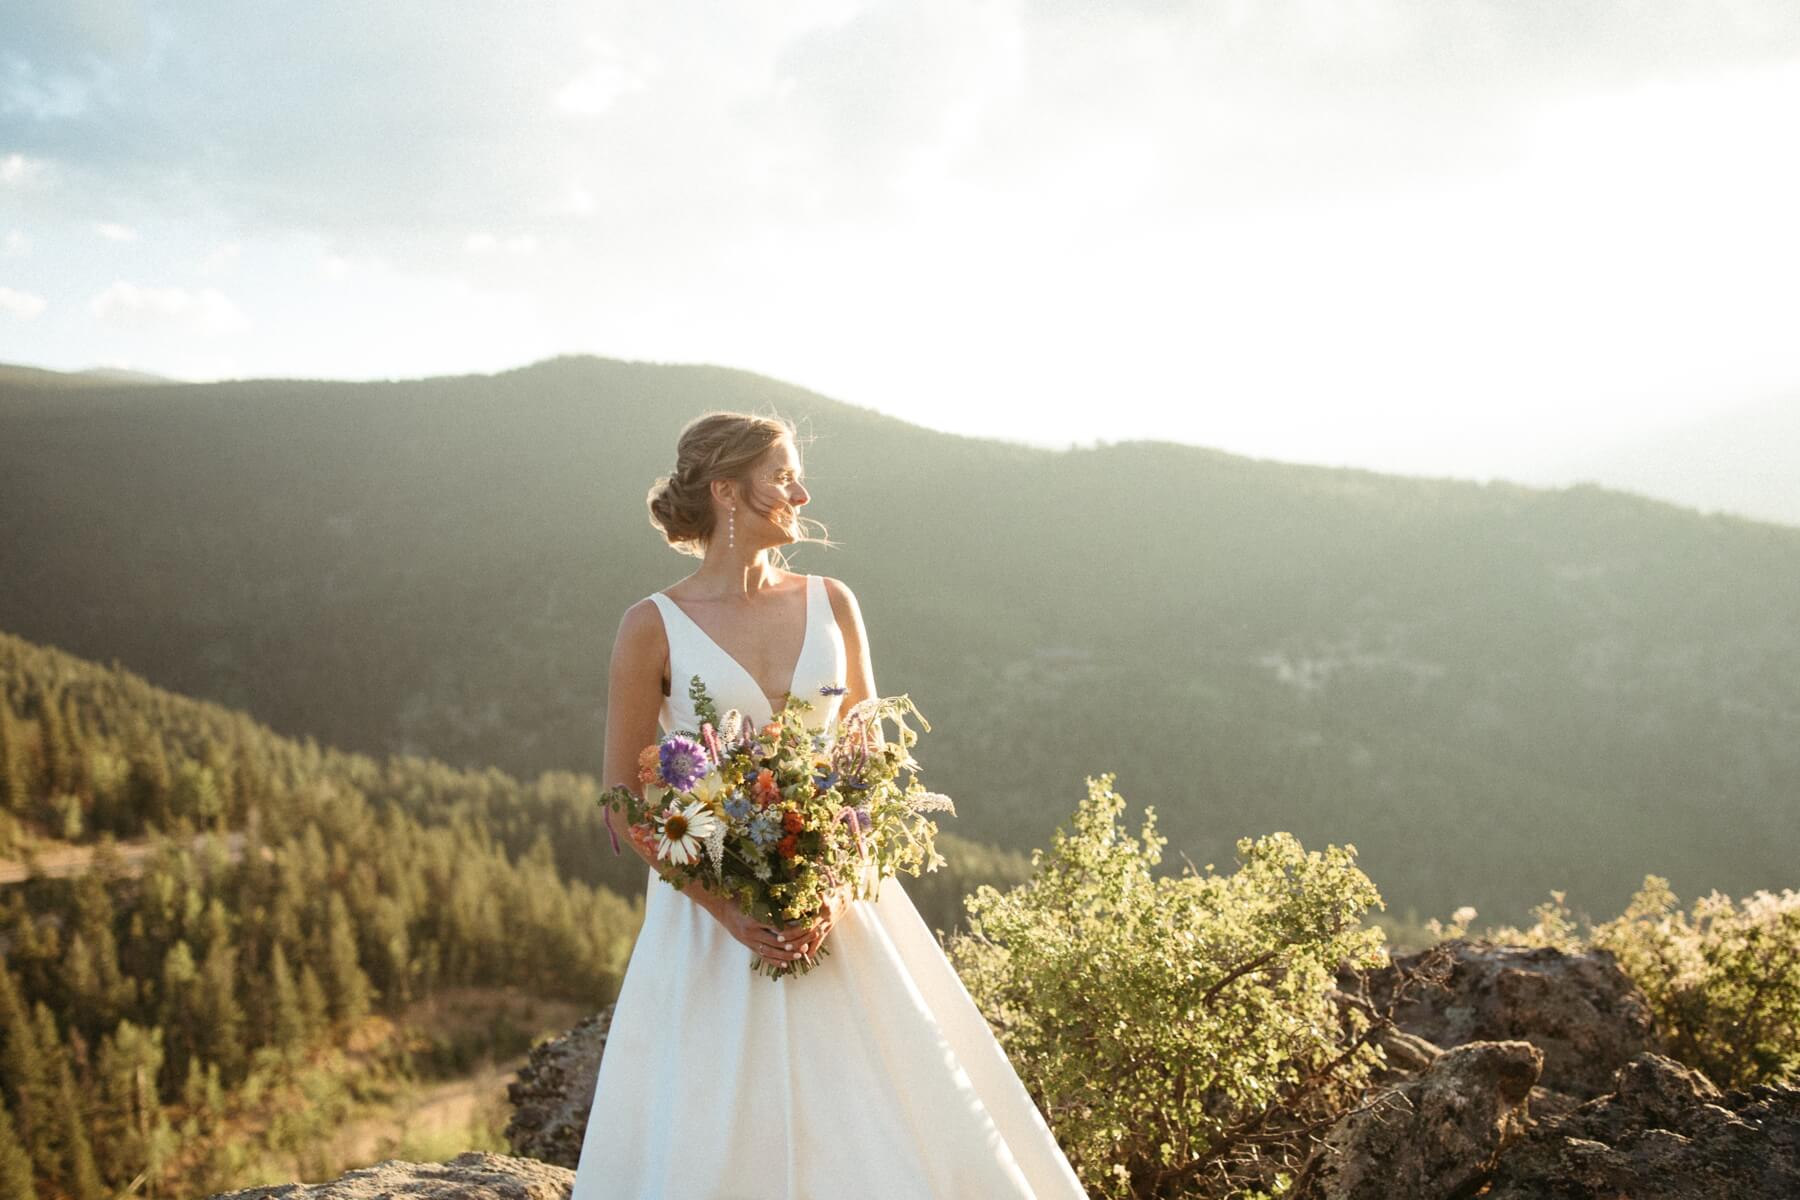 Bride holding a hand tied bouquet while looking off into the distance at North Star Gatherings, a Colorado mountain wedding venue